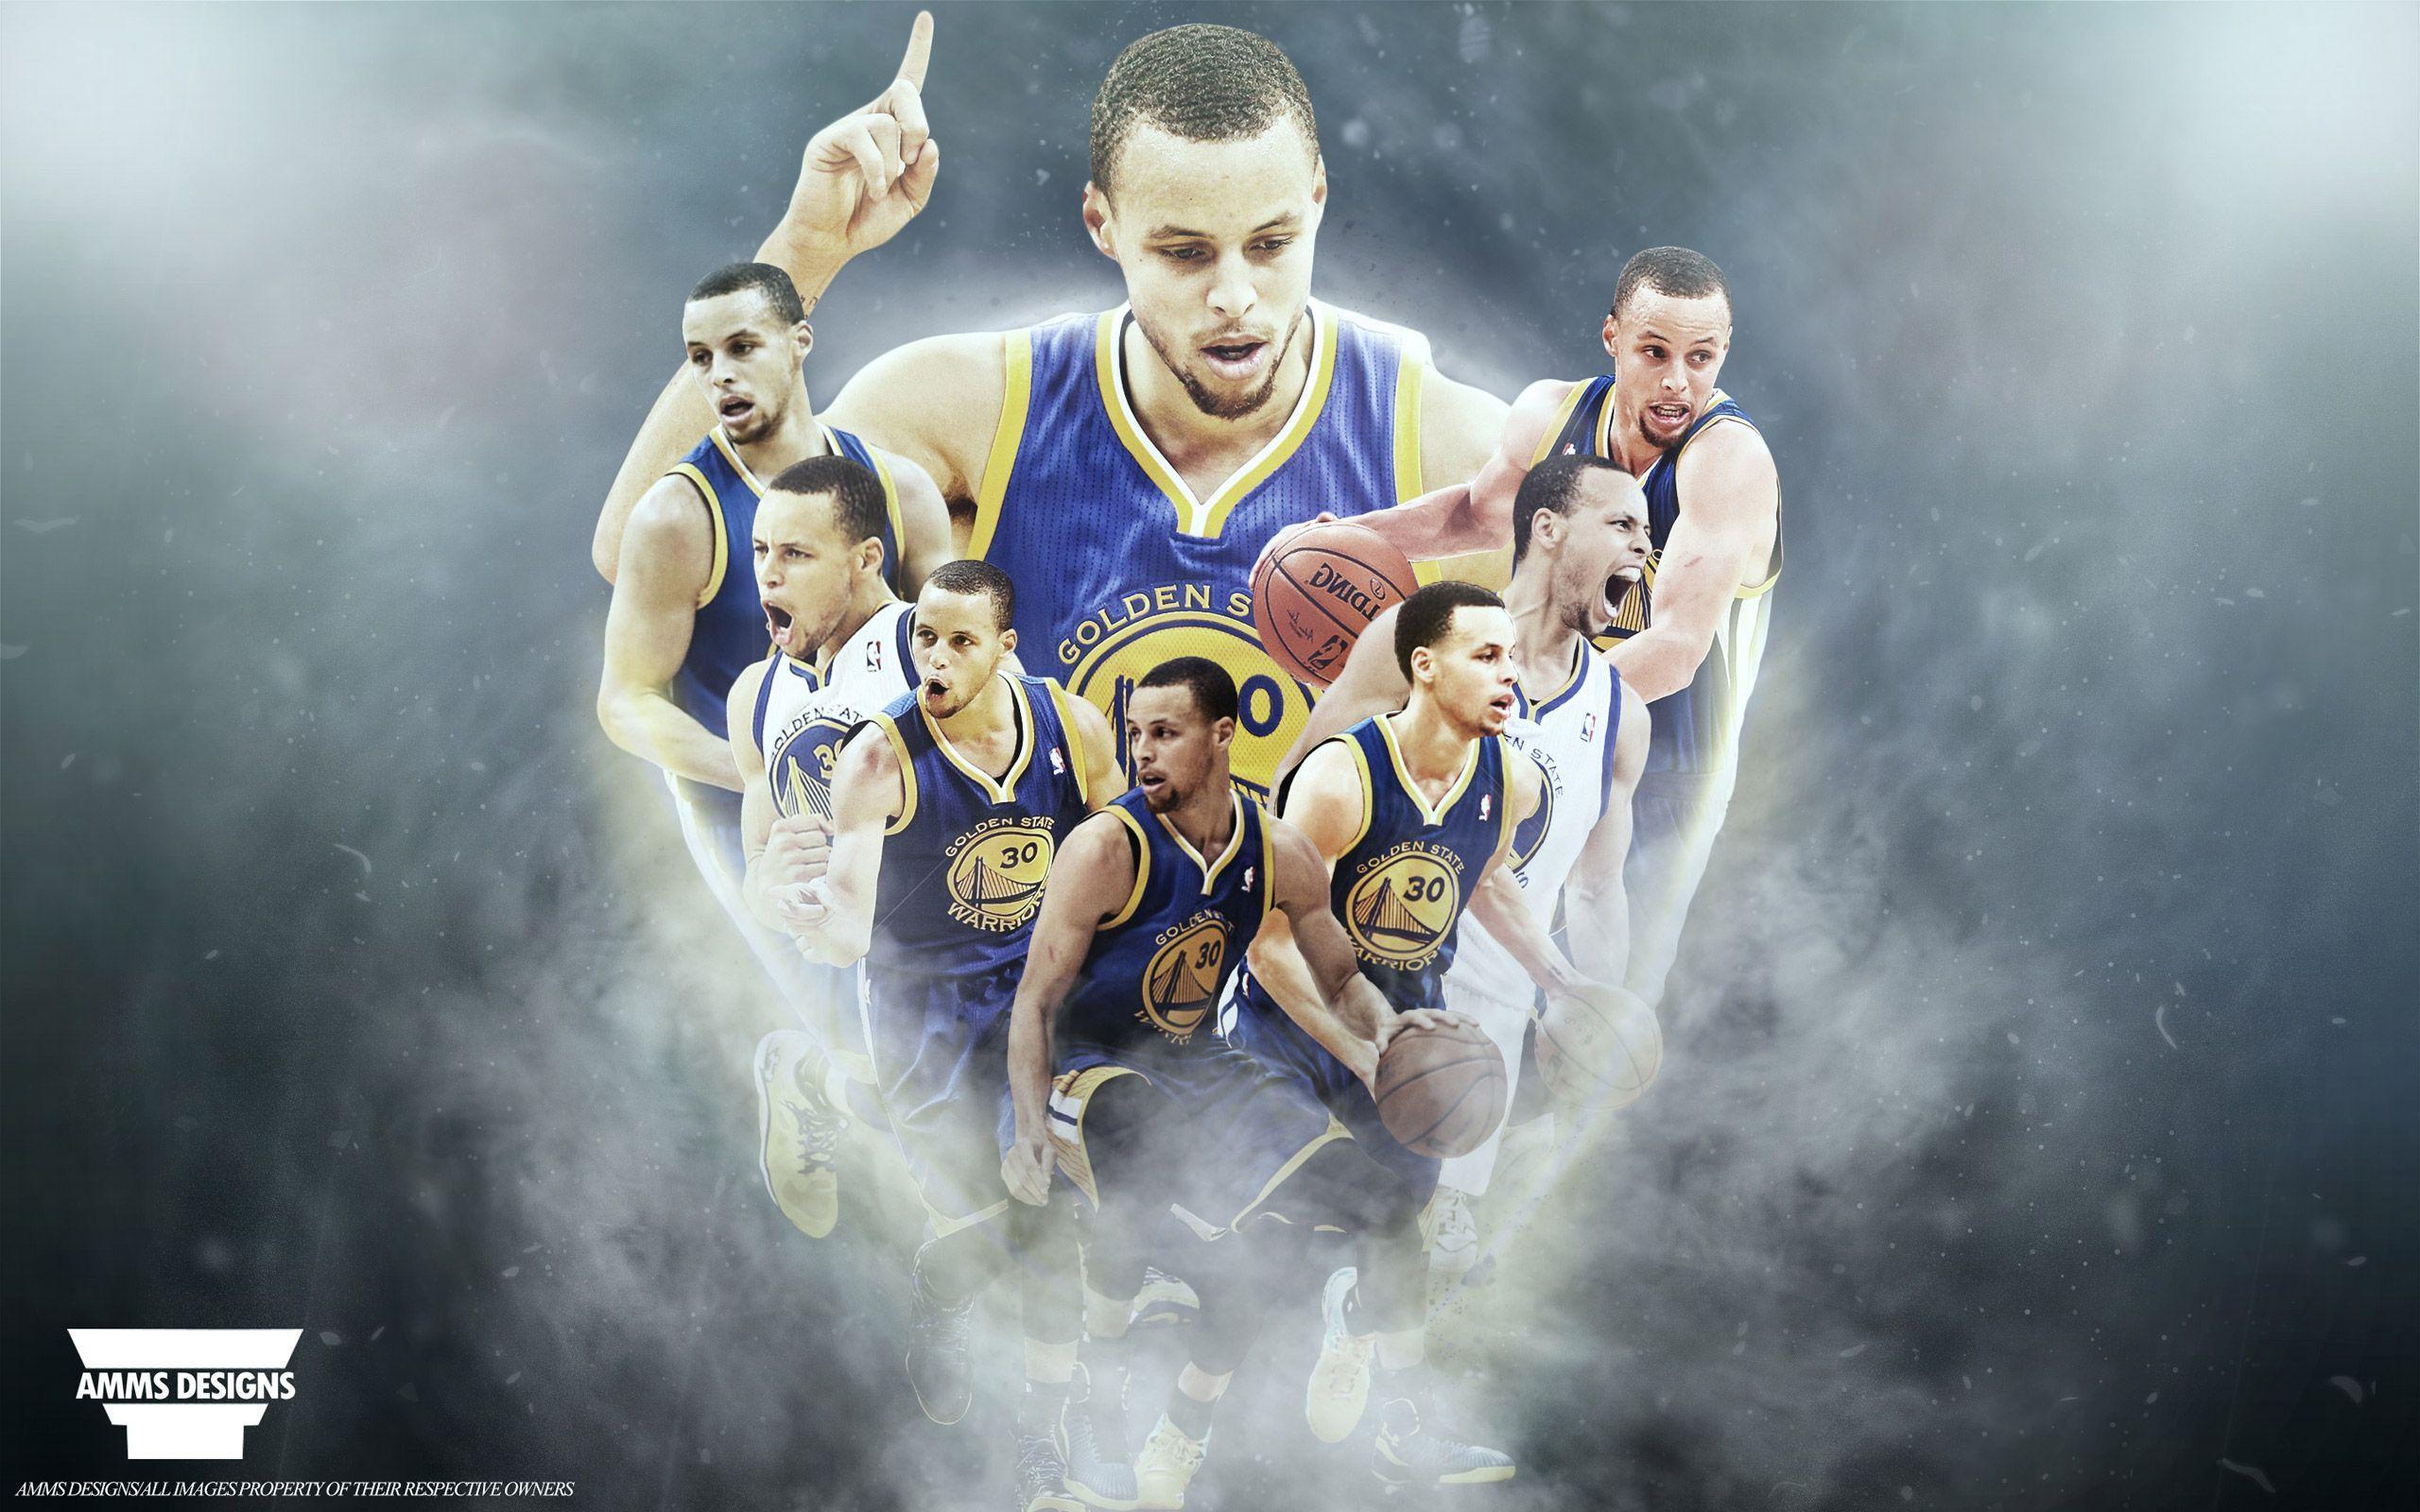 Stephen Curry Wallpaper HD free download